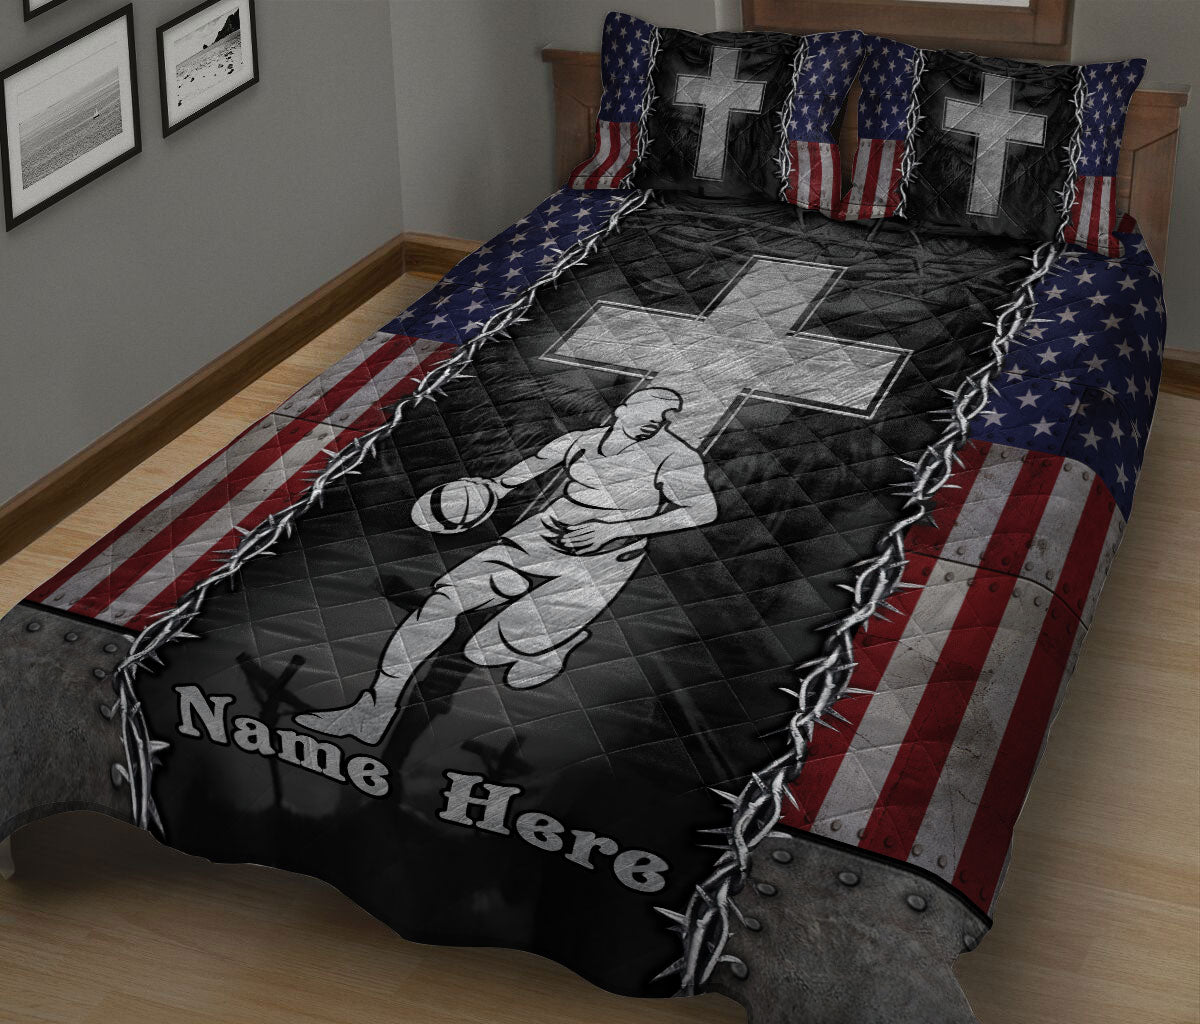 Ohaprints-Quilt-Bed-Set-Pillowcase-Basketball-Christian-Jesus-Cross-American-Us-Flag-Custom-Personalized-Name-Blanket-Bedspread-Bedding-355-King (90'' x 100'')